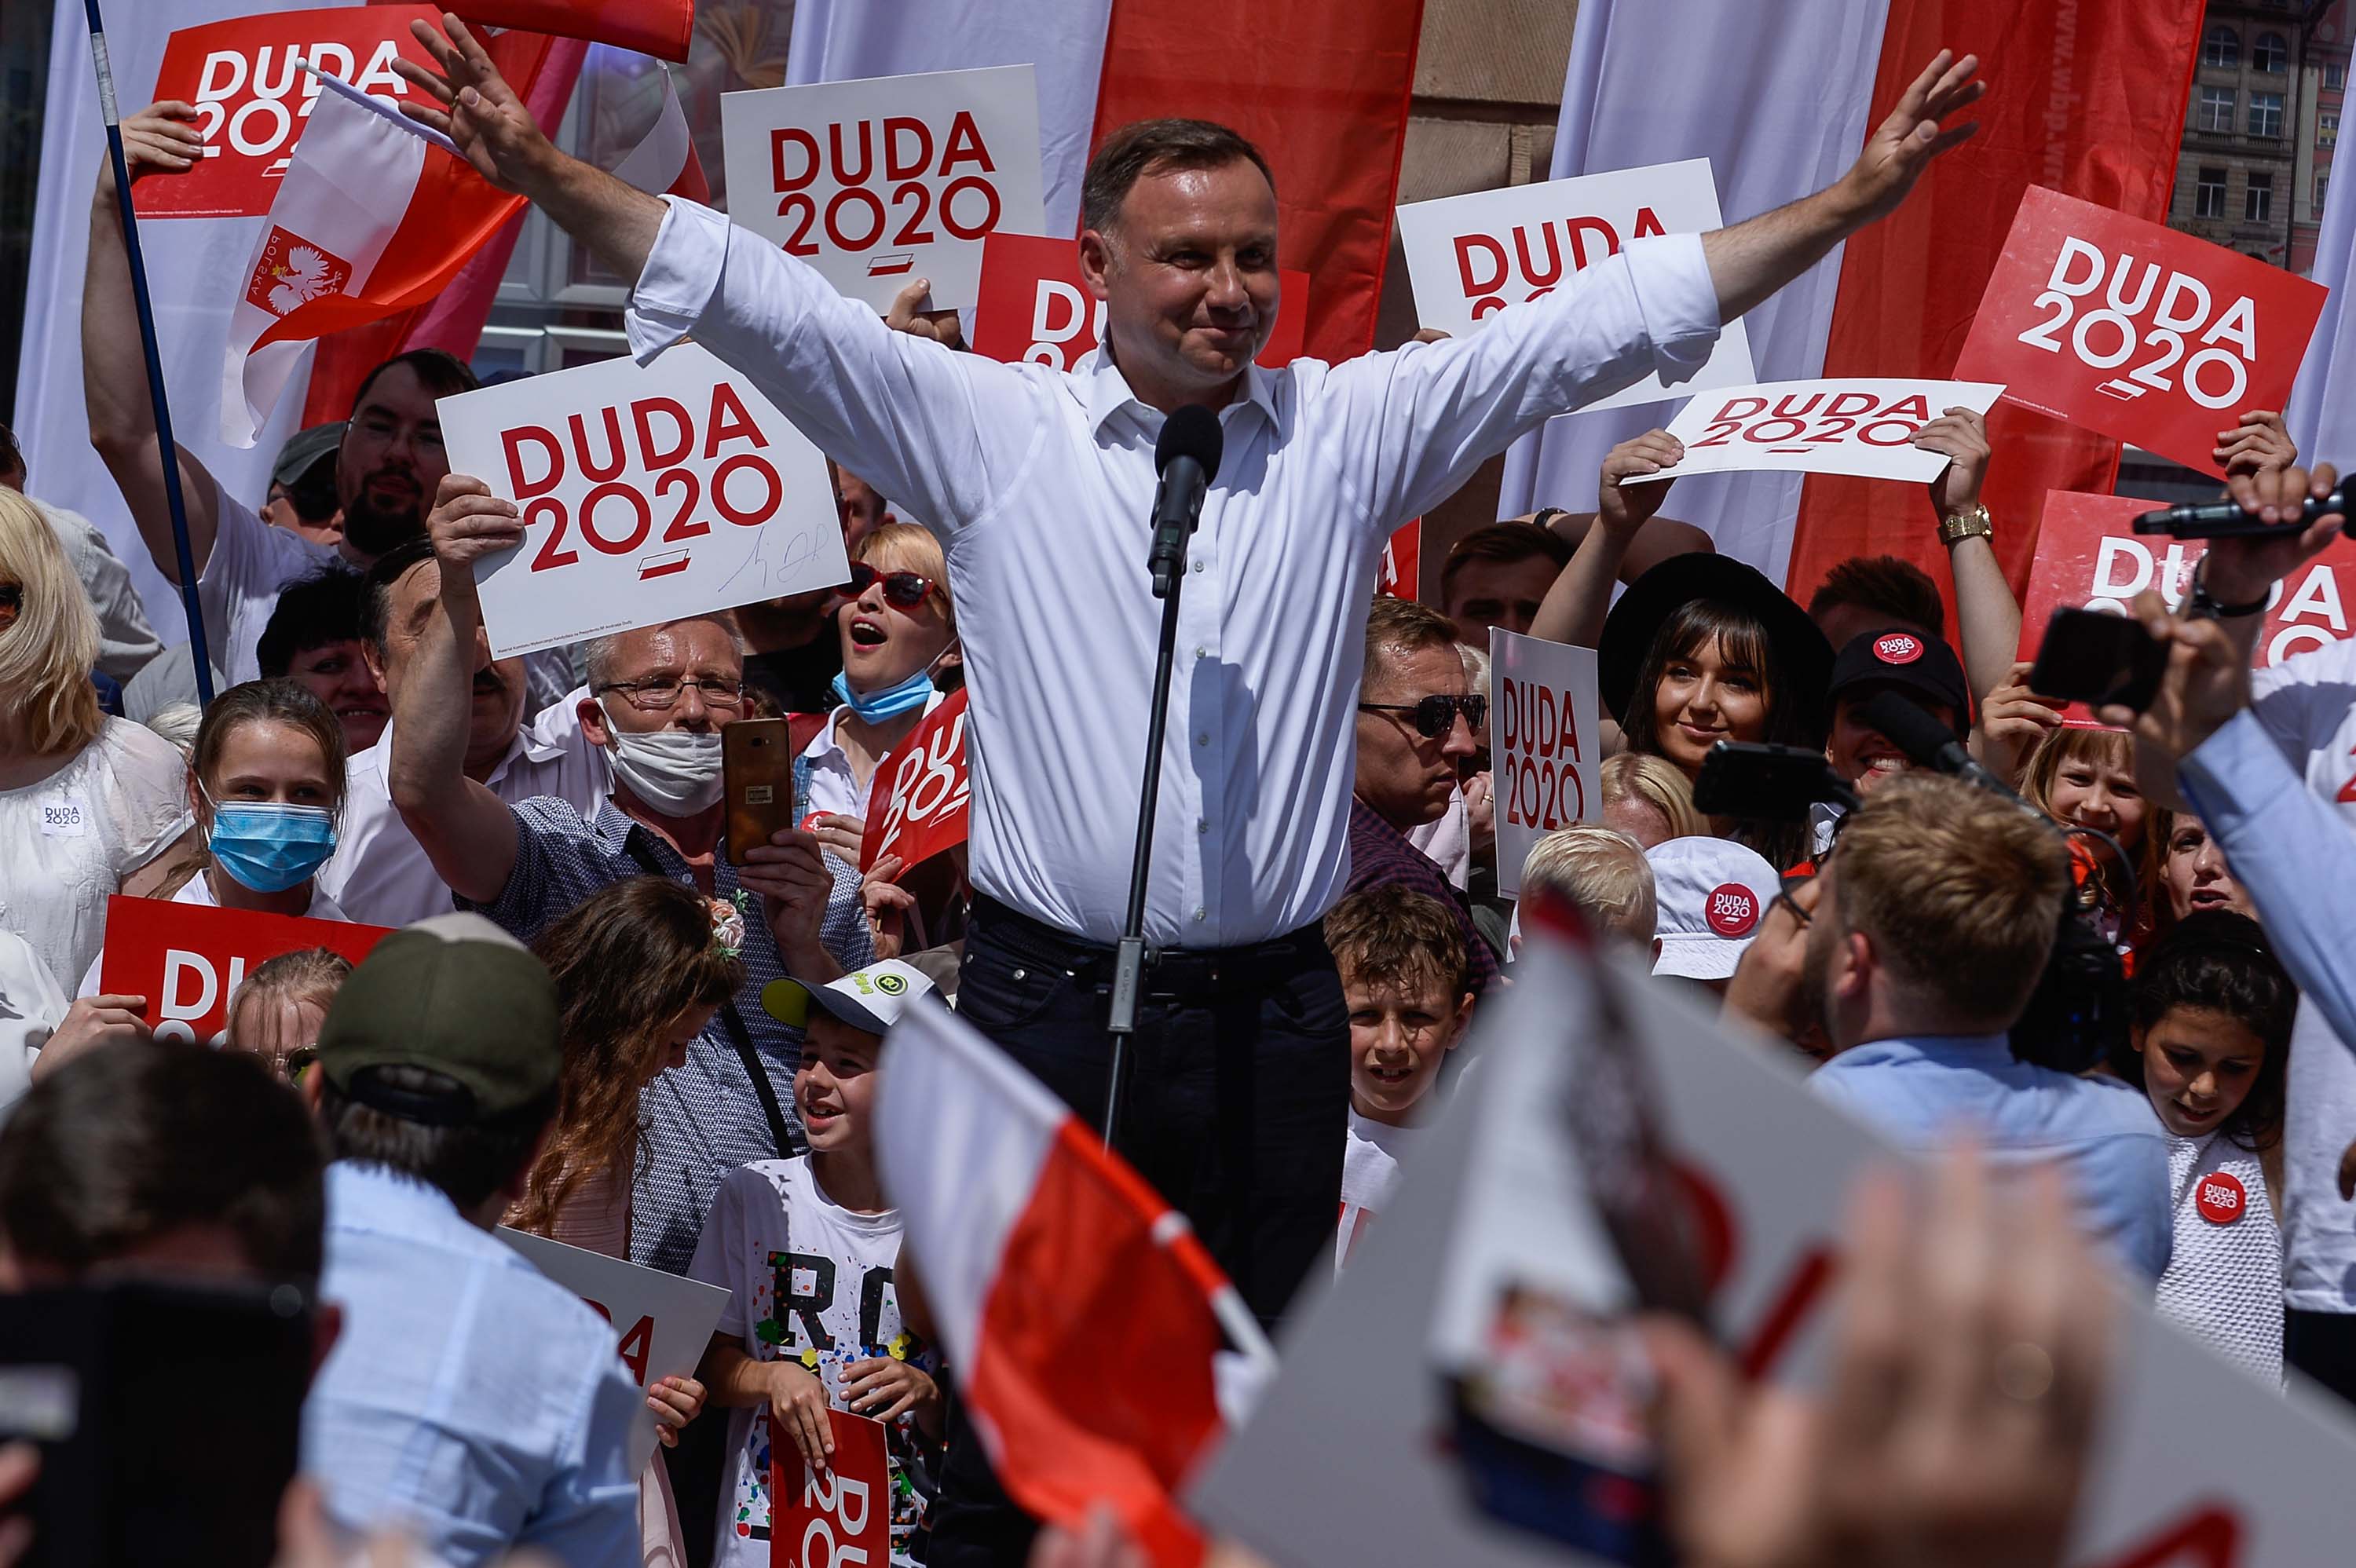 Standing up for the 'real' Poland: how Duda exploited rural-urban divide to  win re-election, Poland